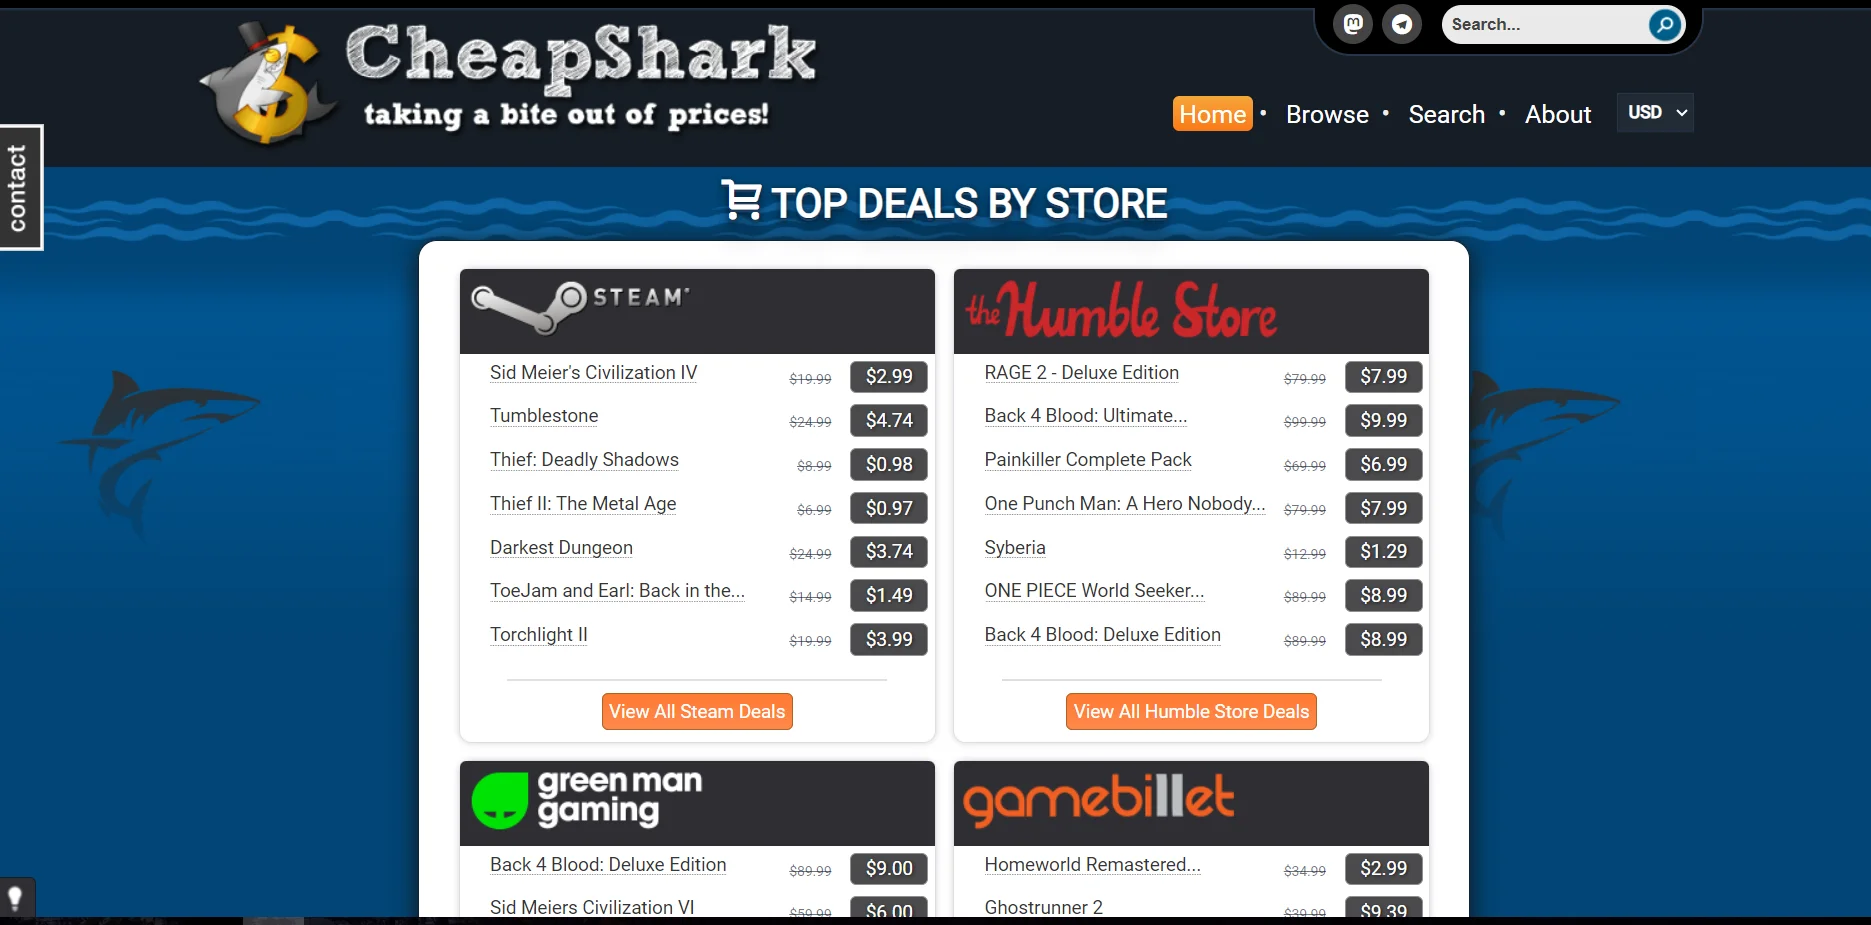 CheapShark is one of the most popular price aggregator site